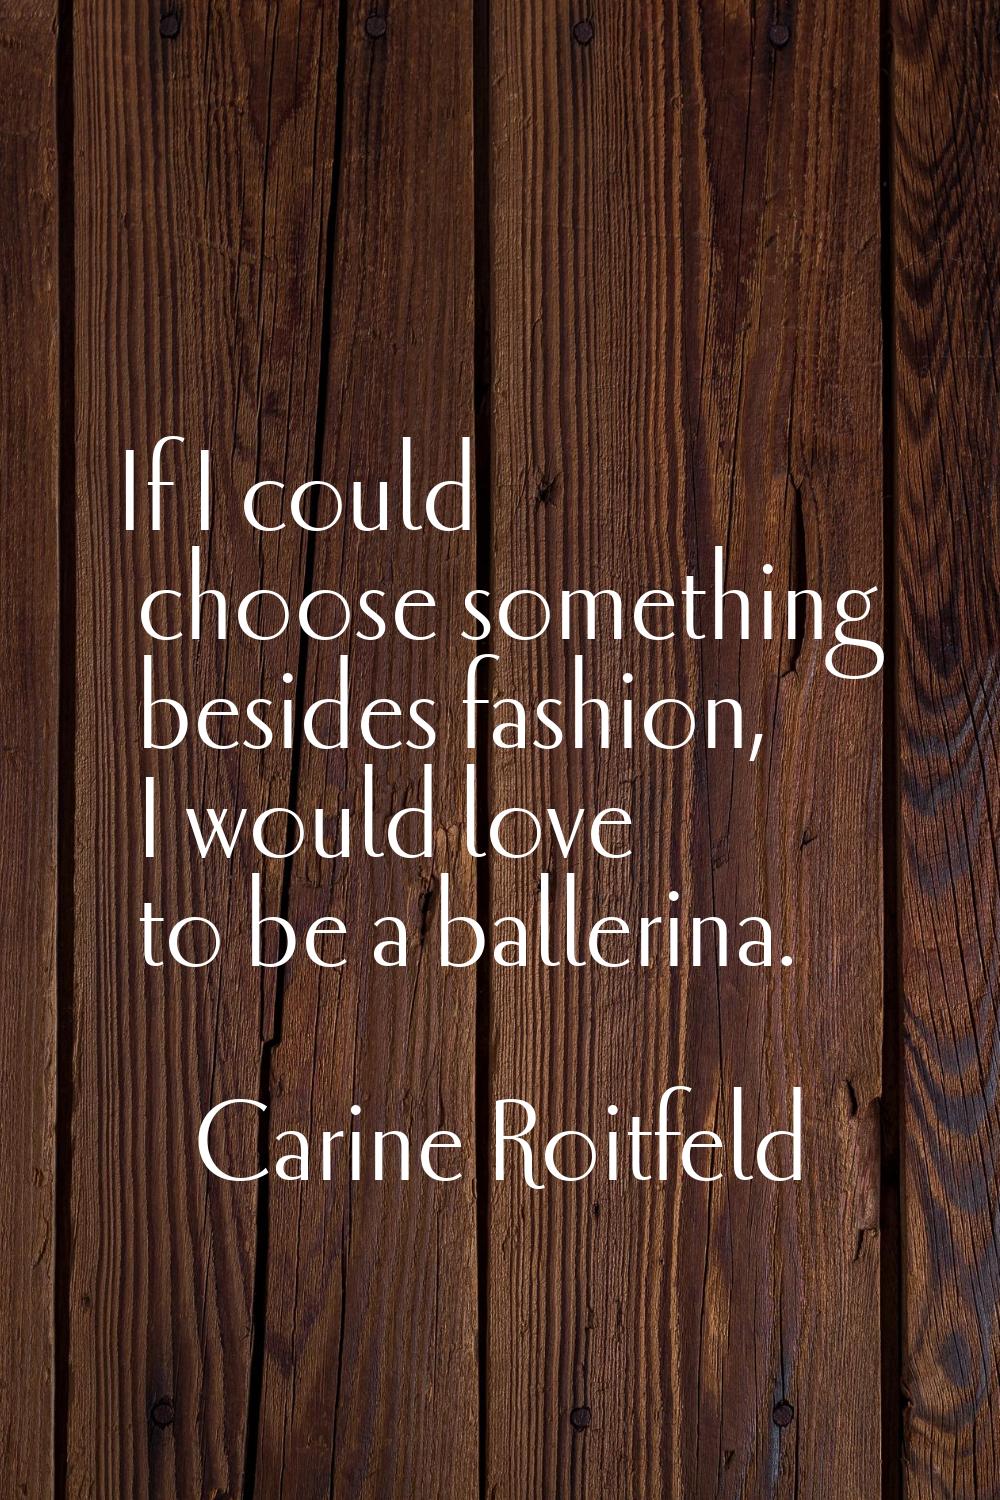 If I could choose something besides fashion, I would love to be a ballerina.